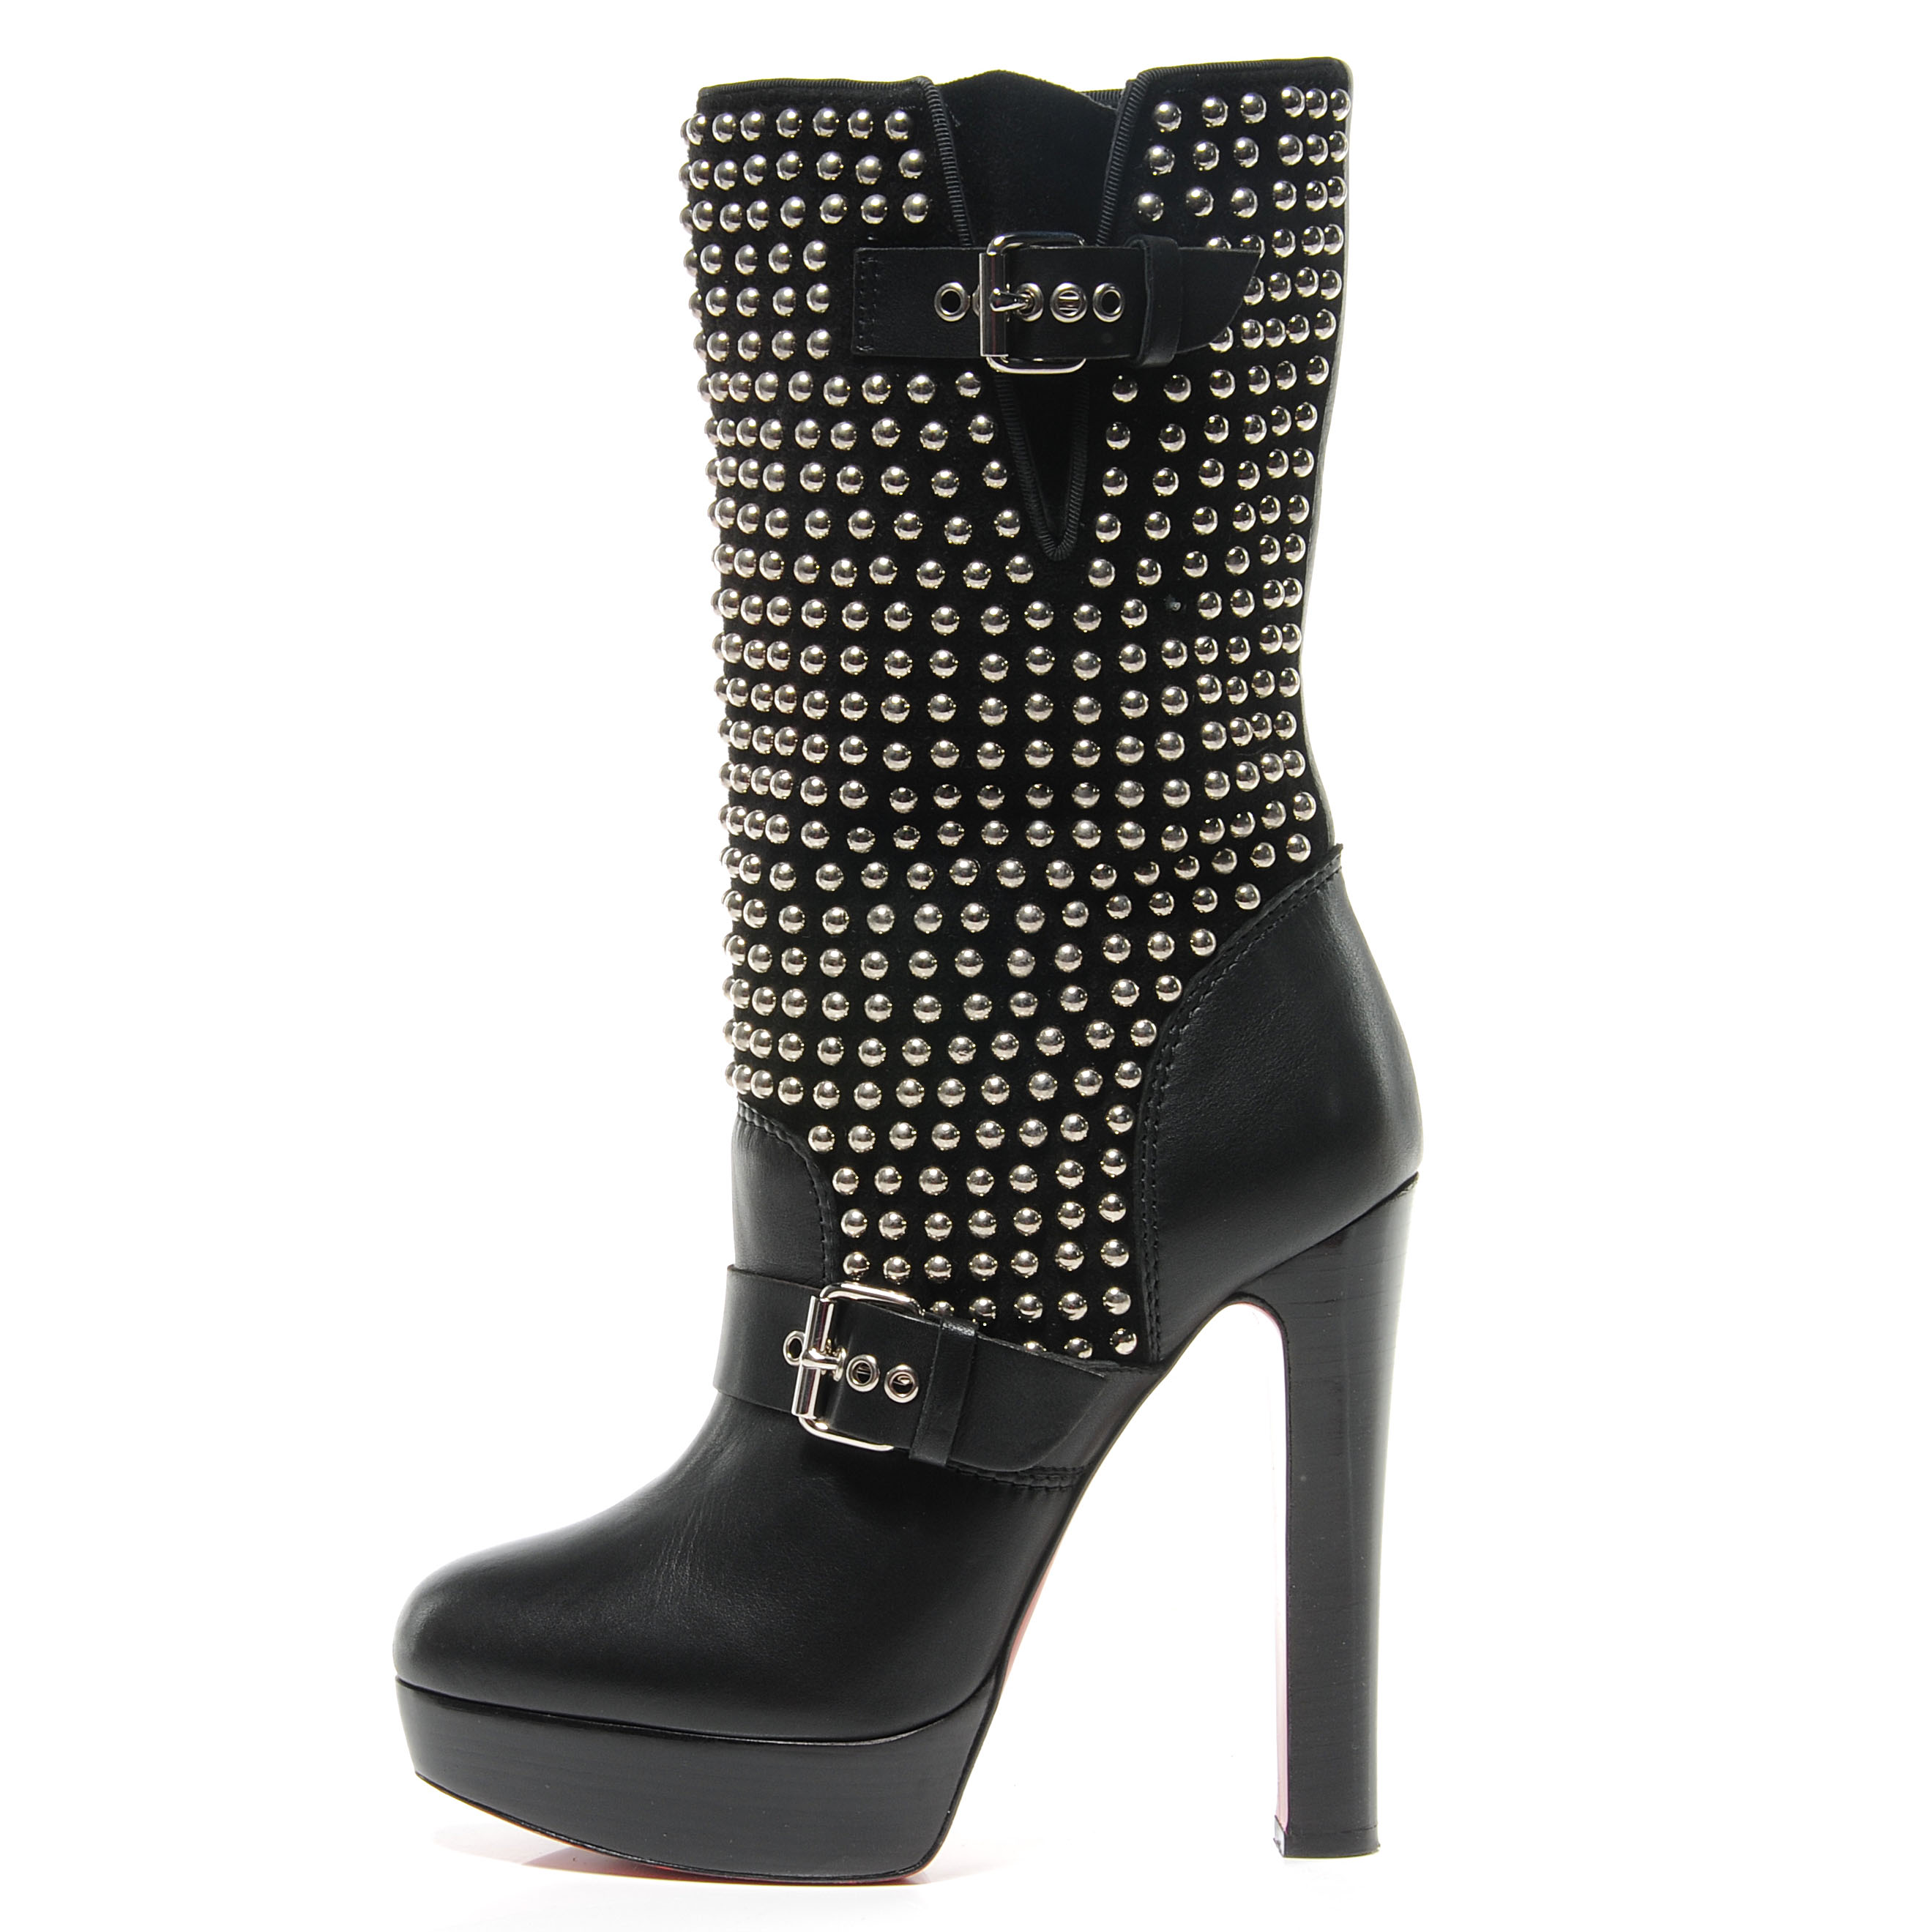 CHRISTIAN LOUBOUTIN Calf VIP Suede Marisa 140 Studded Boots 39.5 Black